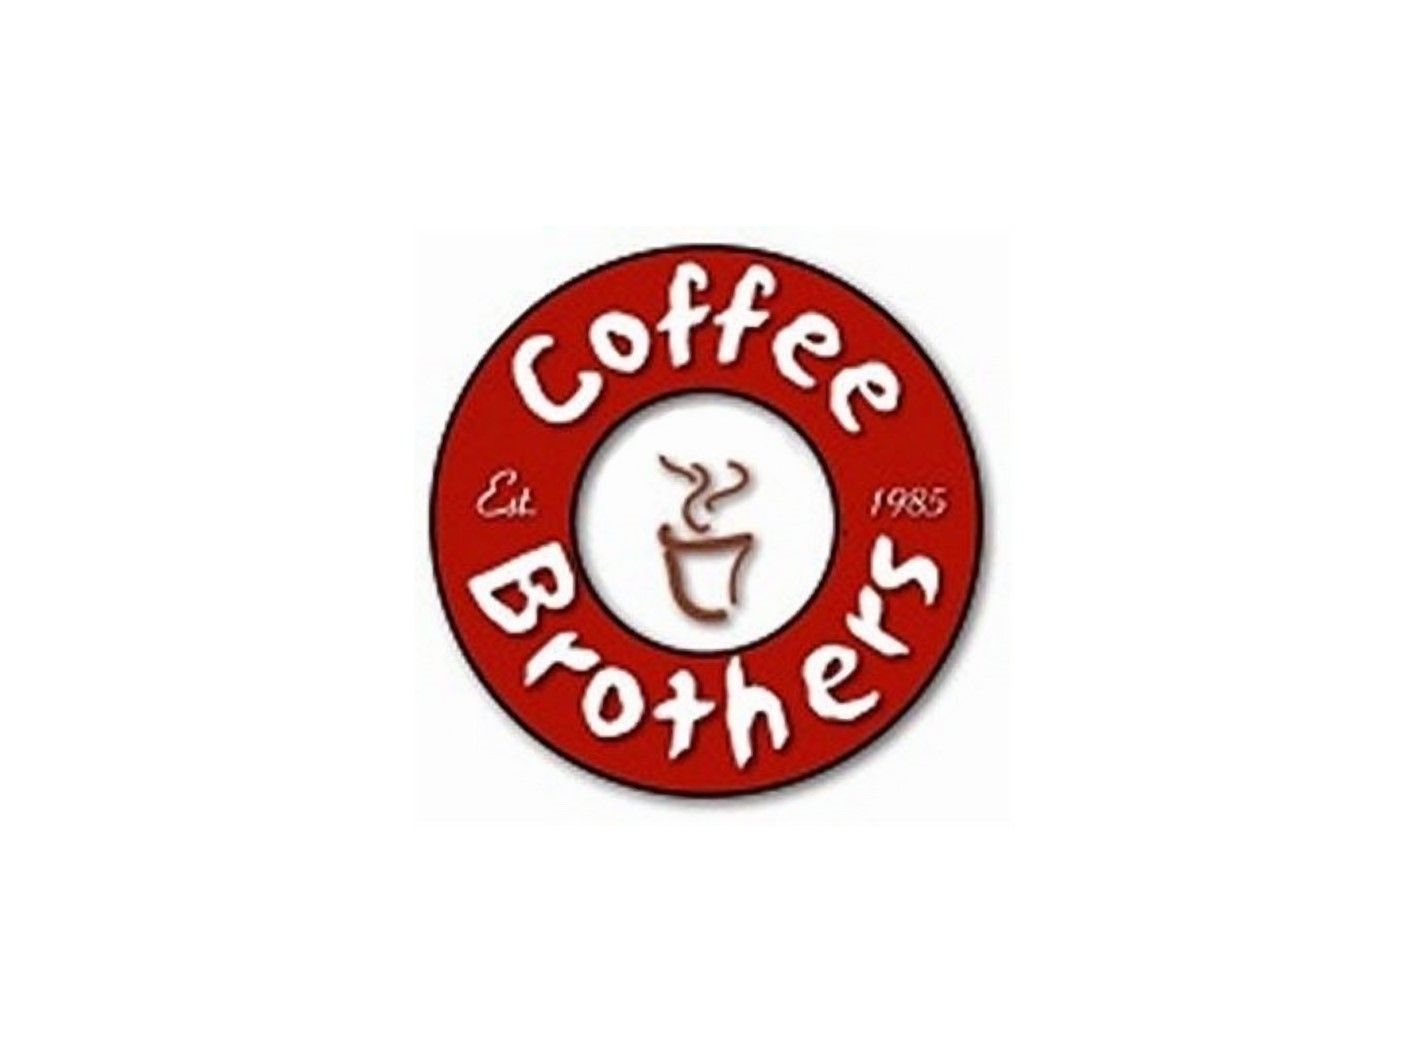 Over 35 Years of Brewing Exceptional Coffee - Coffee Brothers